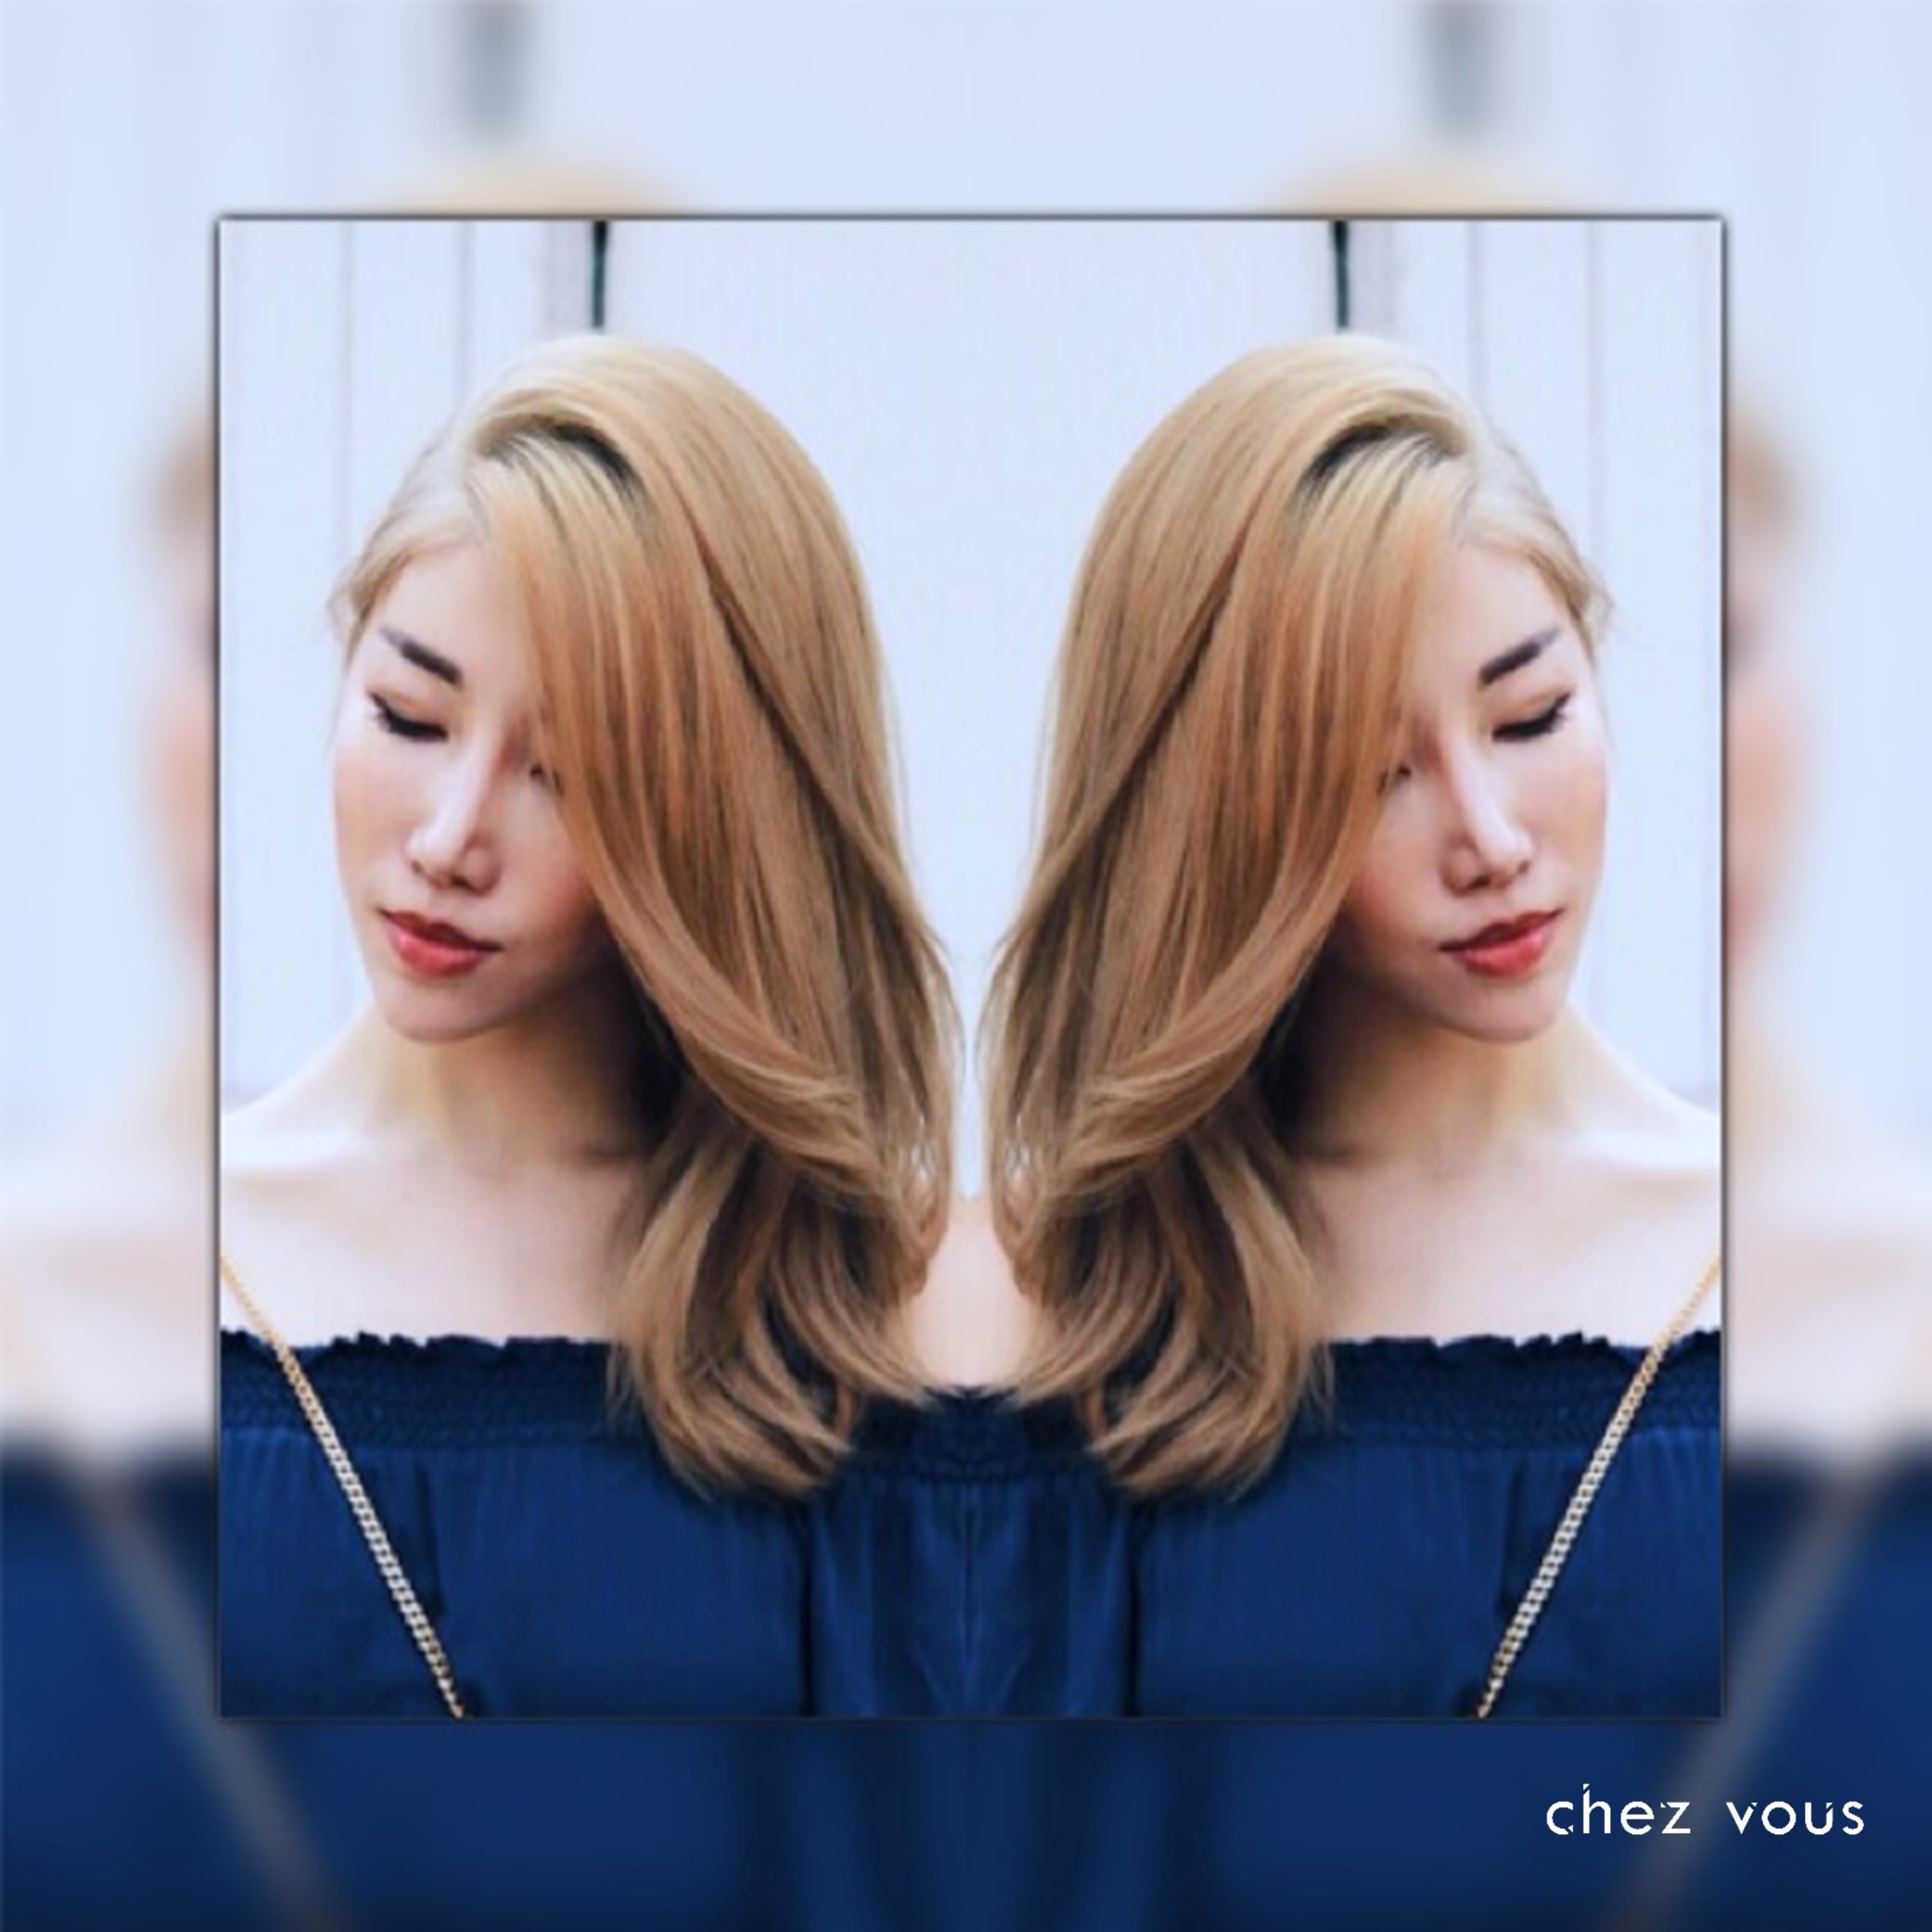 Done by Associate Salon Director of Chez Vous: Shawn Chia | Design: Honey Blonde